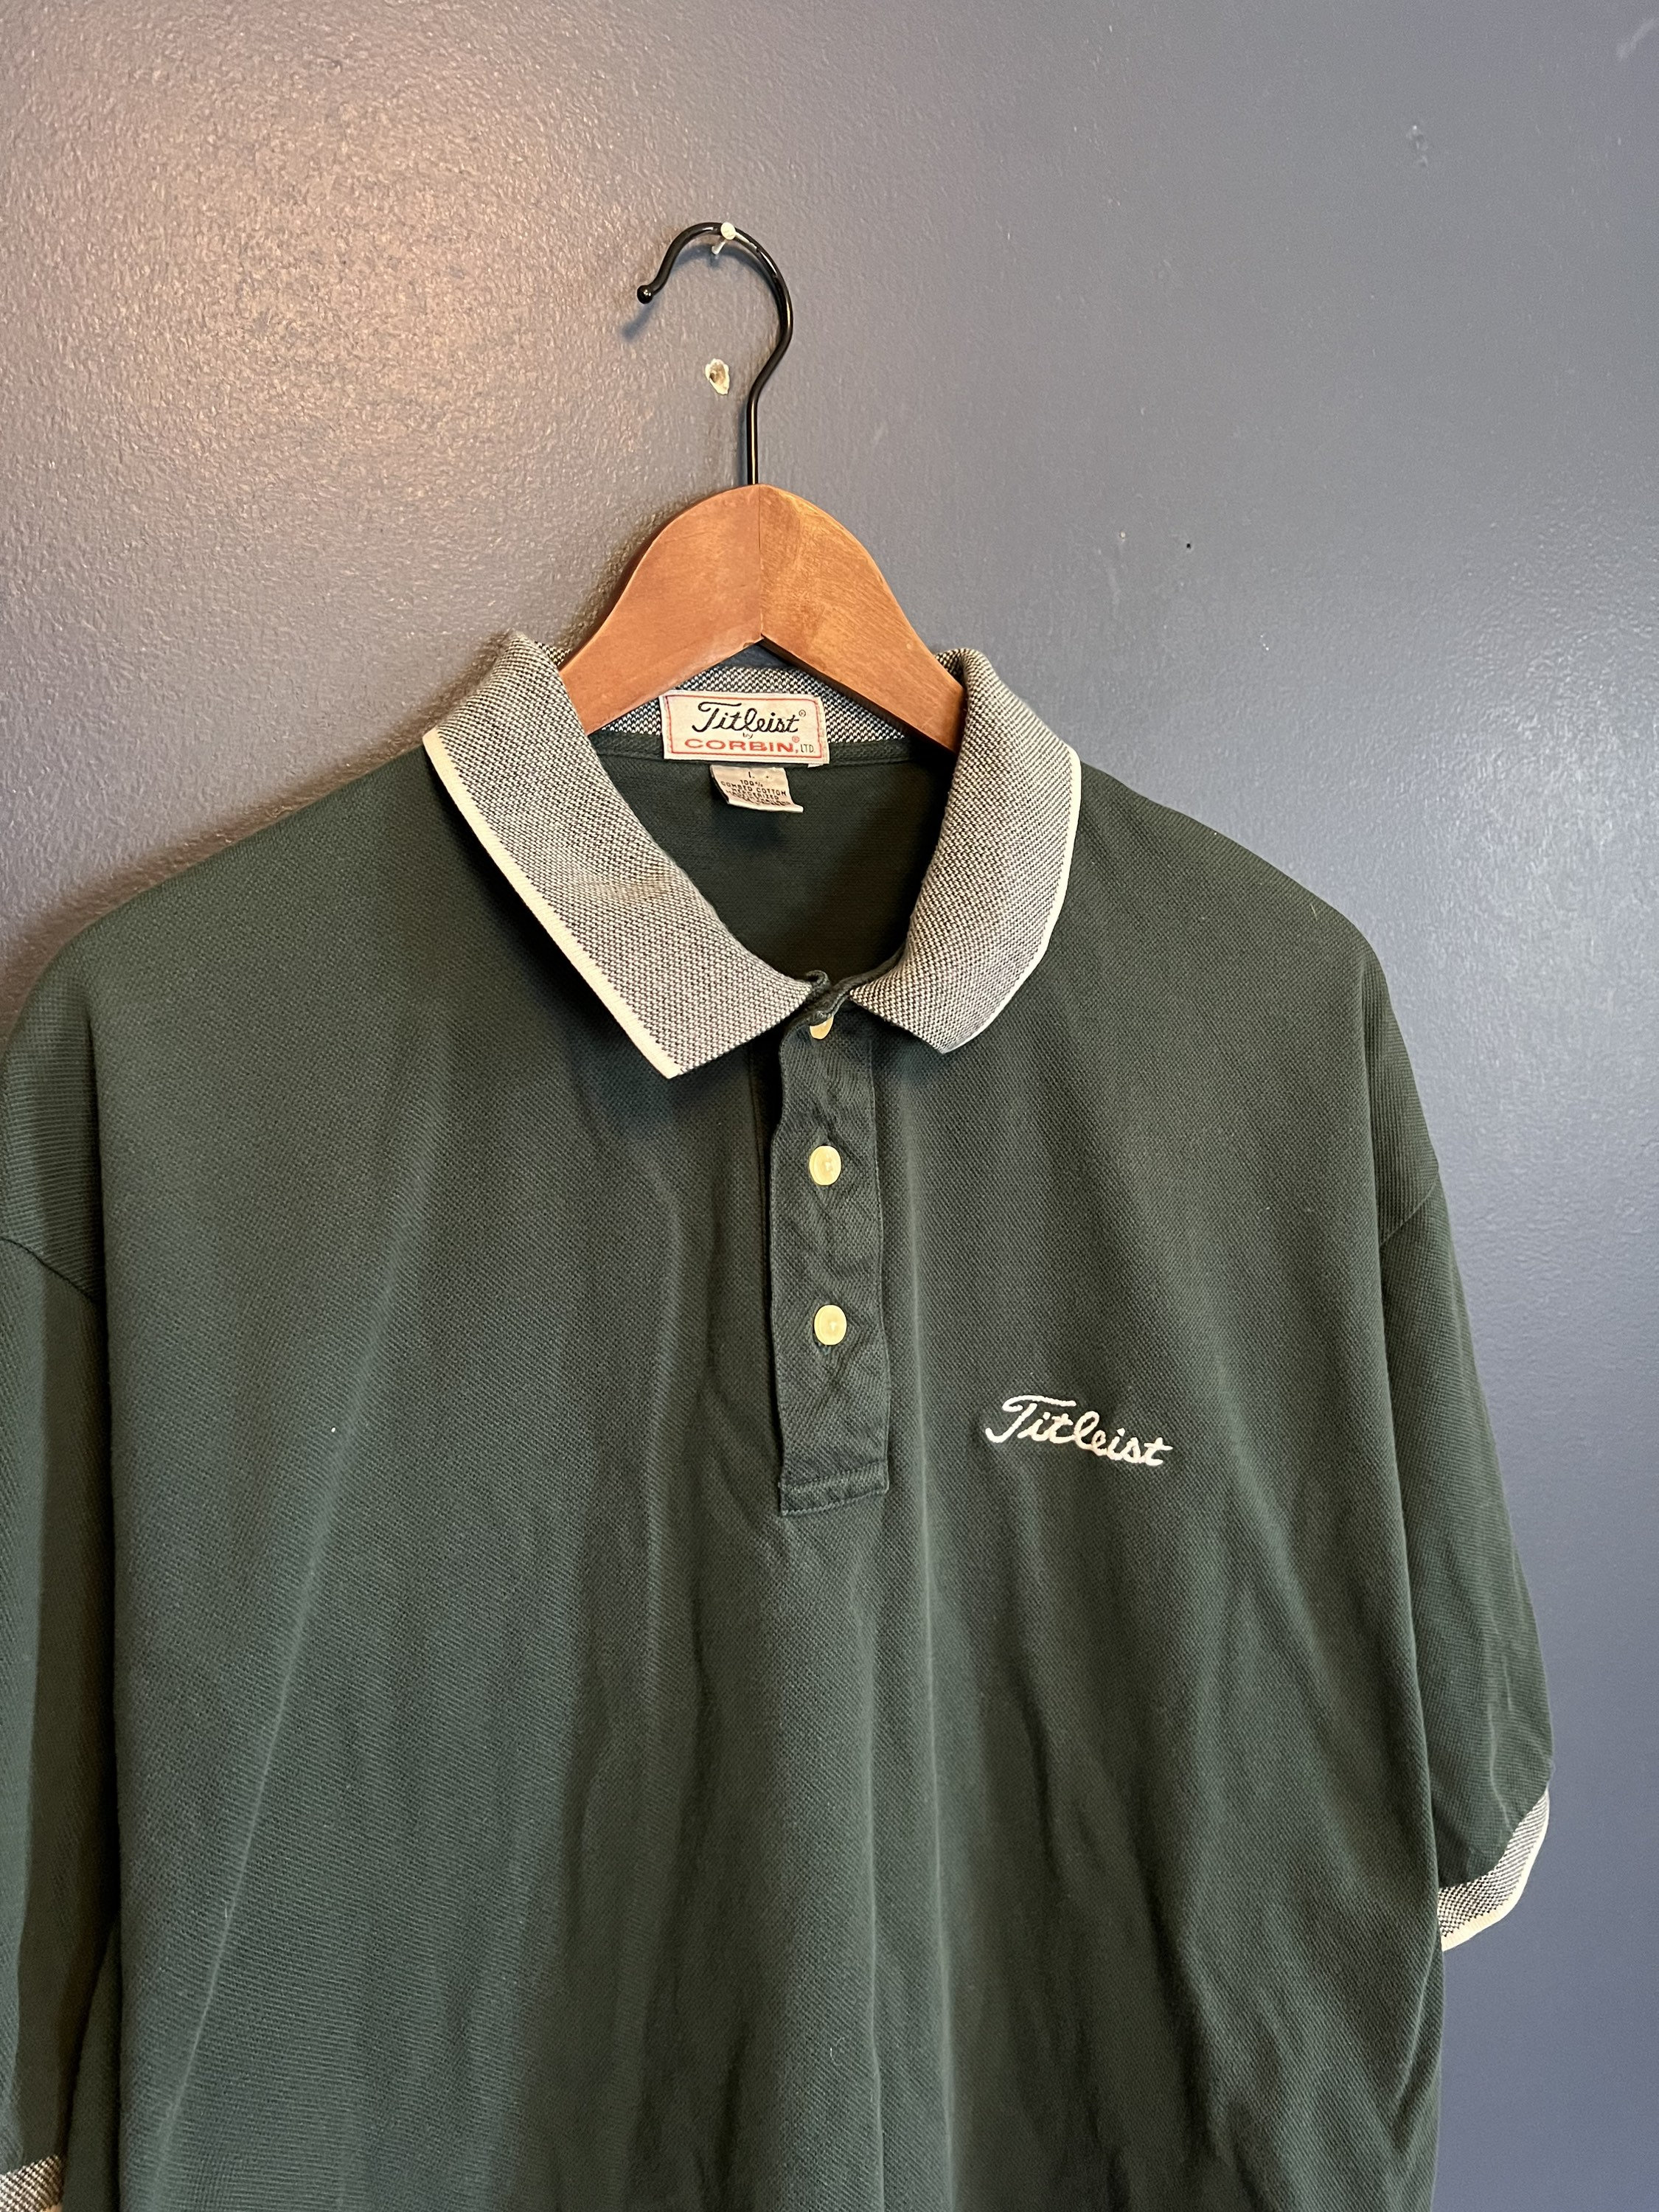 Vintage 90s Titleist Golf Embroidered Polo Shirt Size Large 